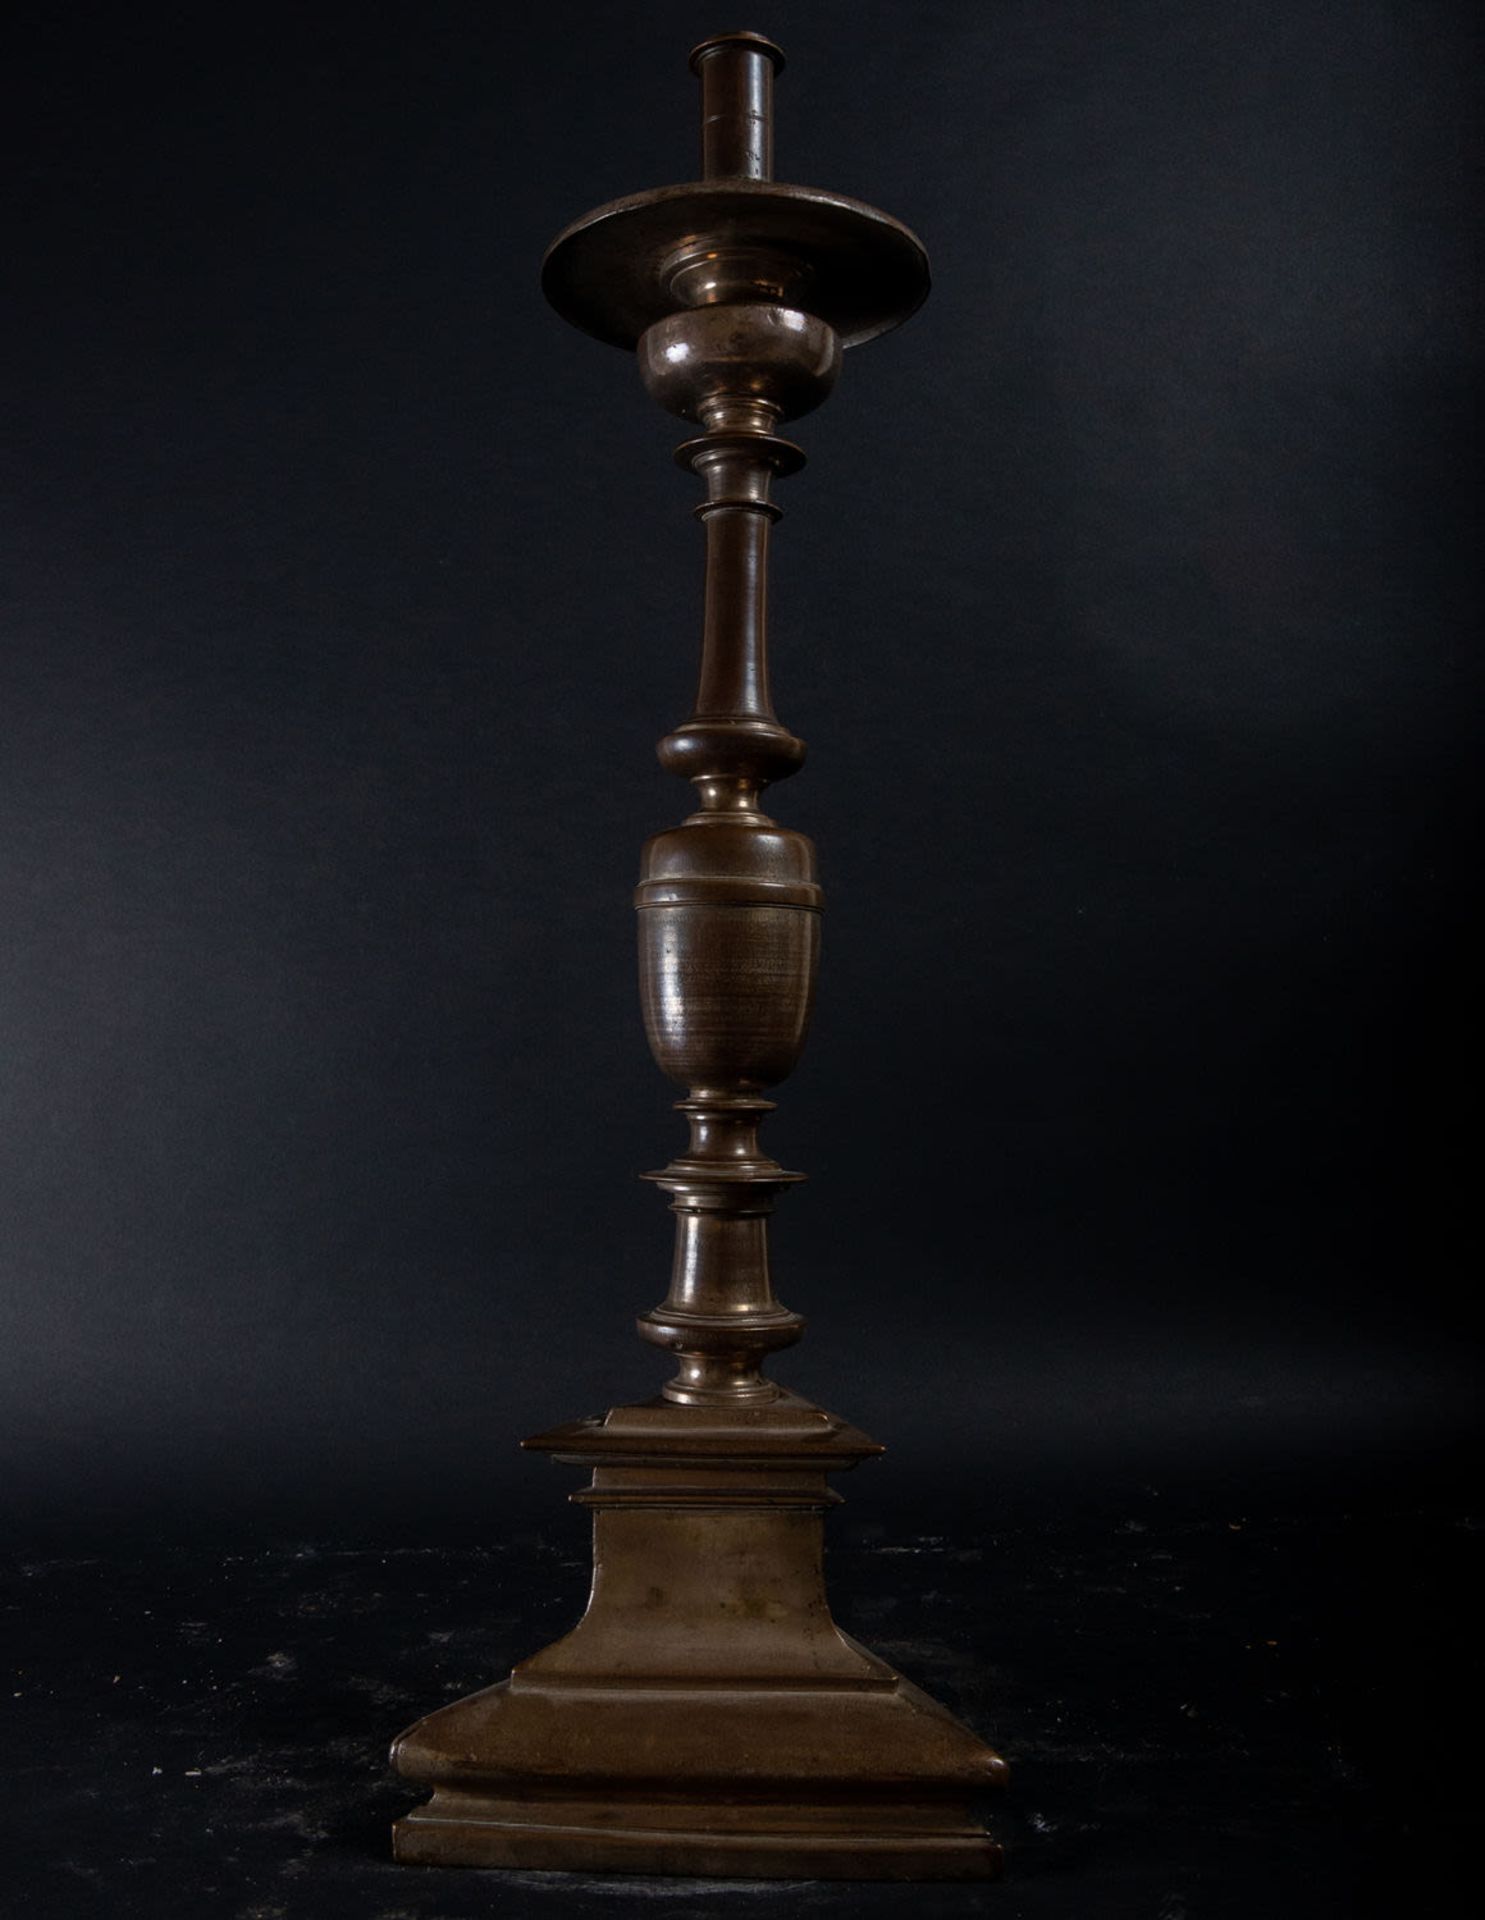 Important Pair of Bronze Plateresque Candelabra, Valladolid, Spain, 16th century - Image 3 of 5